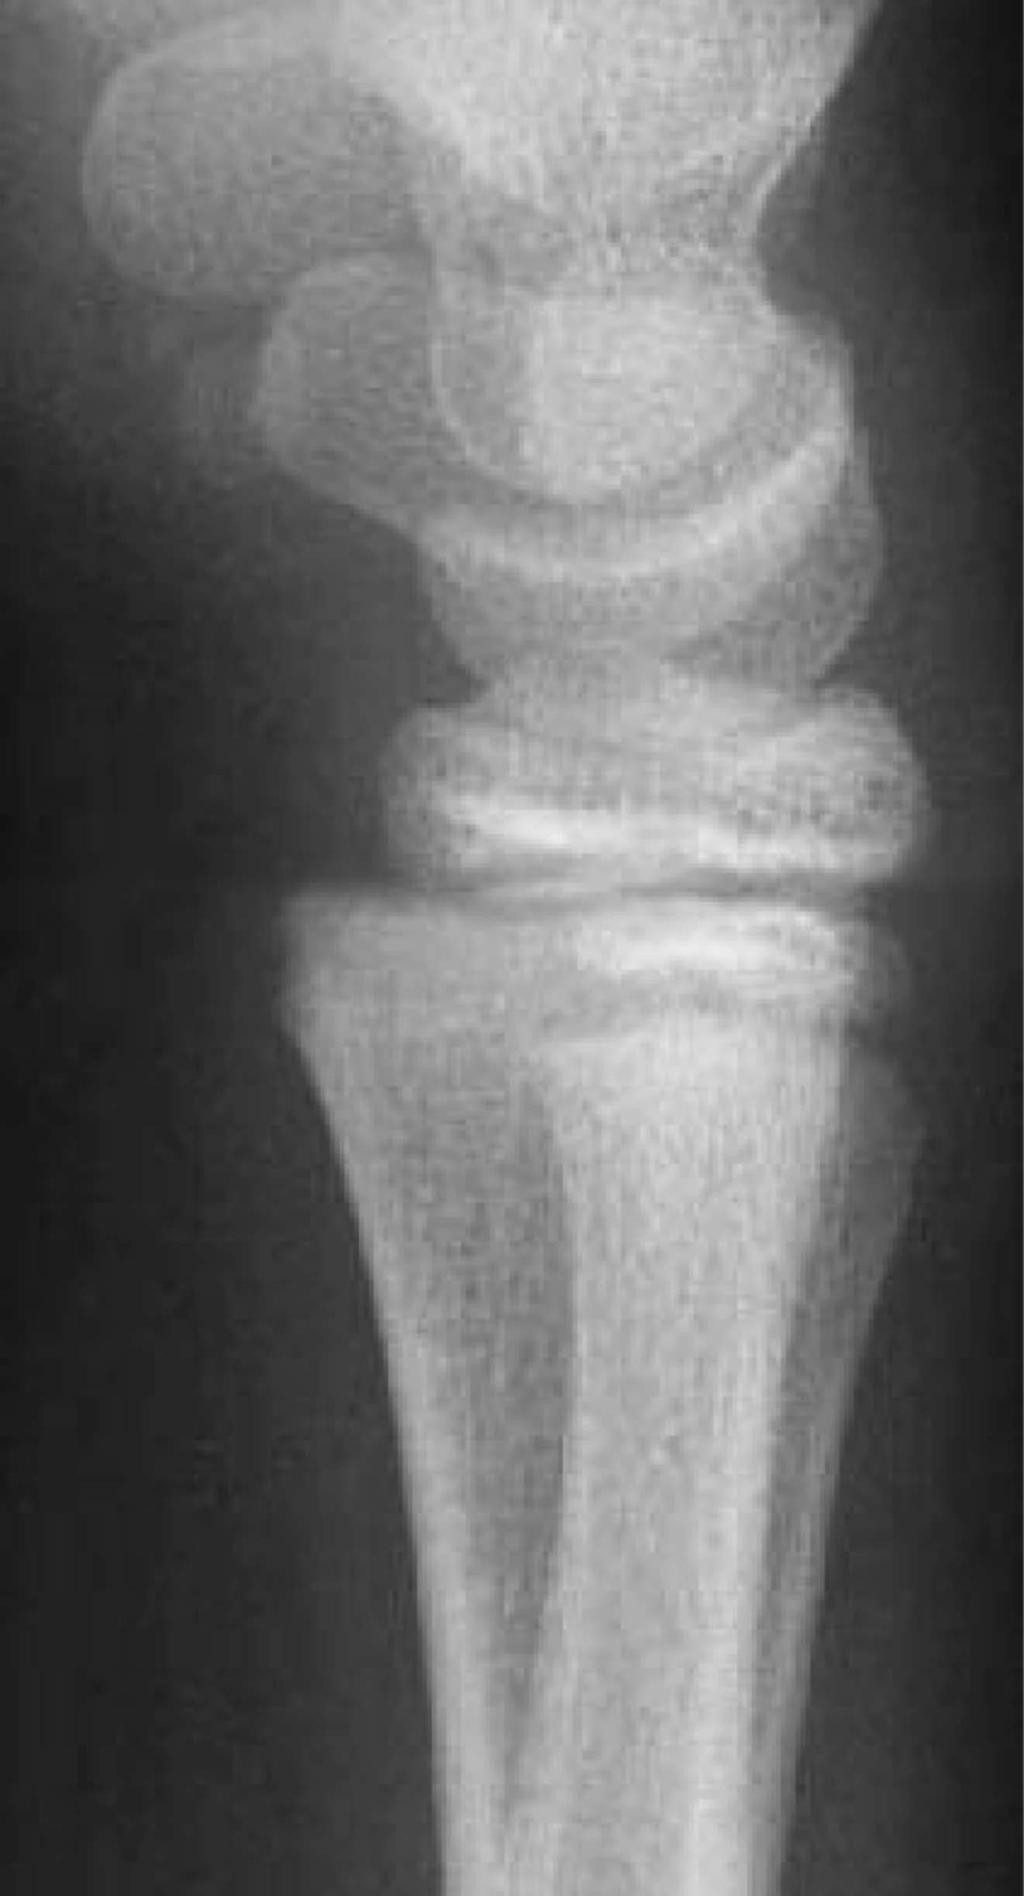 14 Advanced Emergency Nursing Journal aftercare instructions. He was placed in a thumb cast for 4 weeks. After 1 month, the patient was able to resume normal activities without restriction. Figure 4.